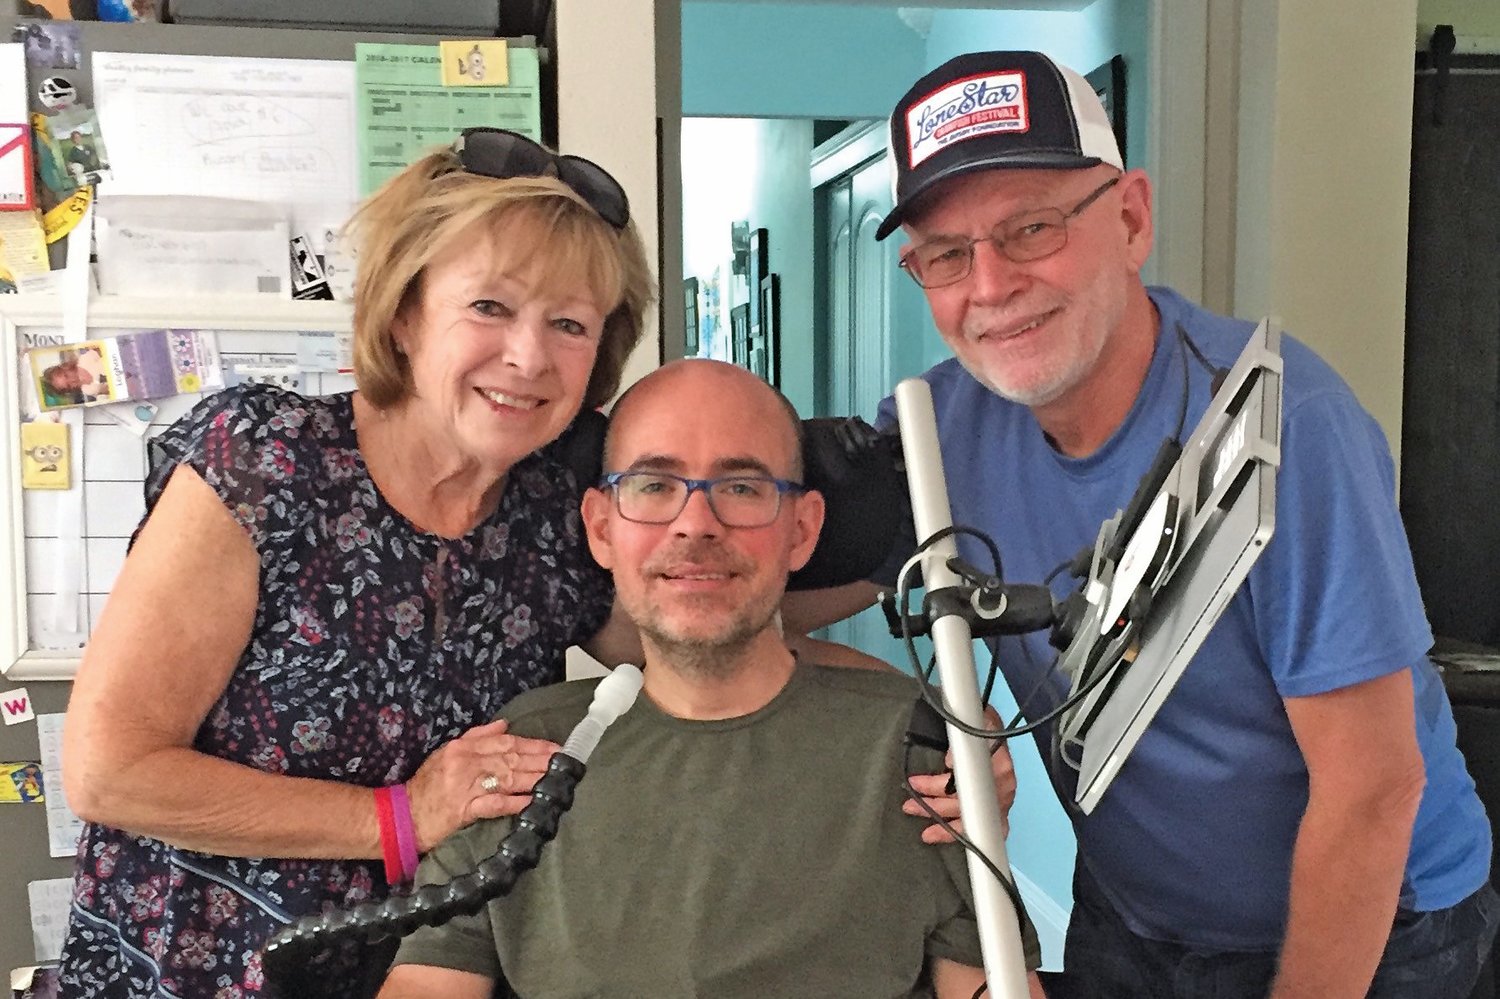 Central Bucks residents Barbara and Gene Smith with their son, Jay, who is living with ALS. Jay’s family are organizing a fundraiser, DanceForJay#endALS, which is set to take place in January. Supporters can participate virtually or in person. To register, visit bidpal.net/danceforjay. Proceeds will support Jay’s Medical Trust.